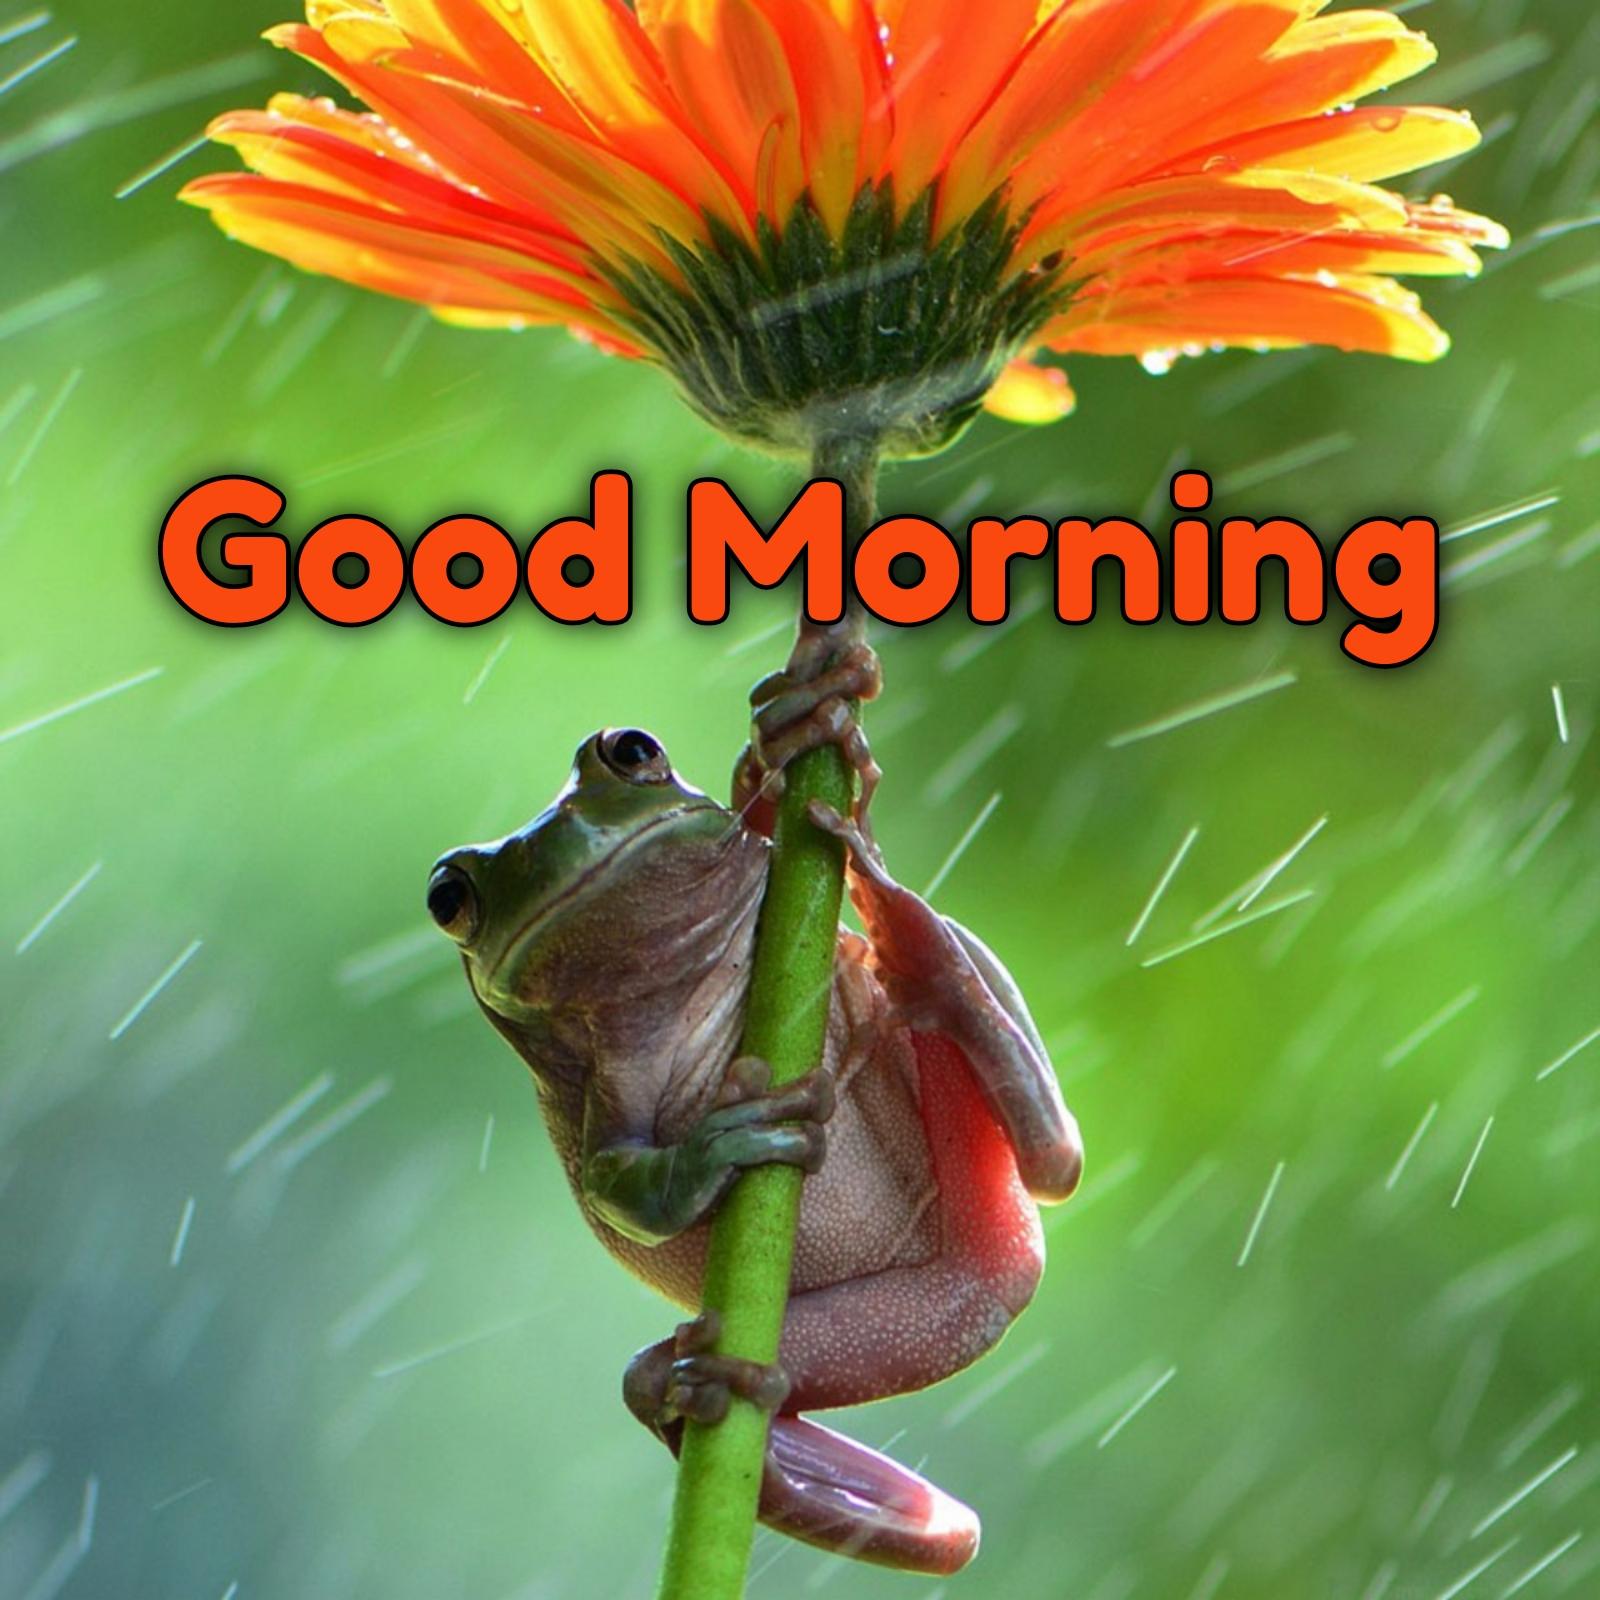 Good Morning Images In Rain